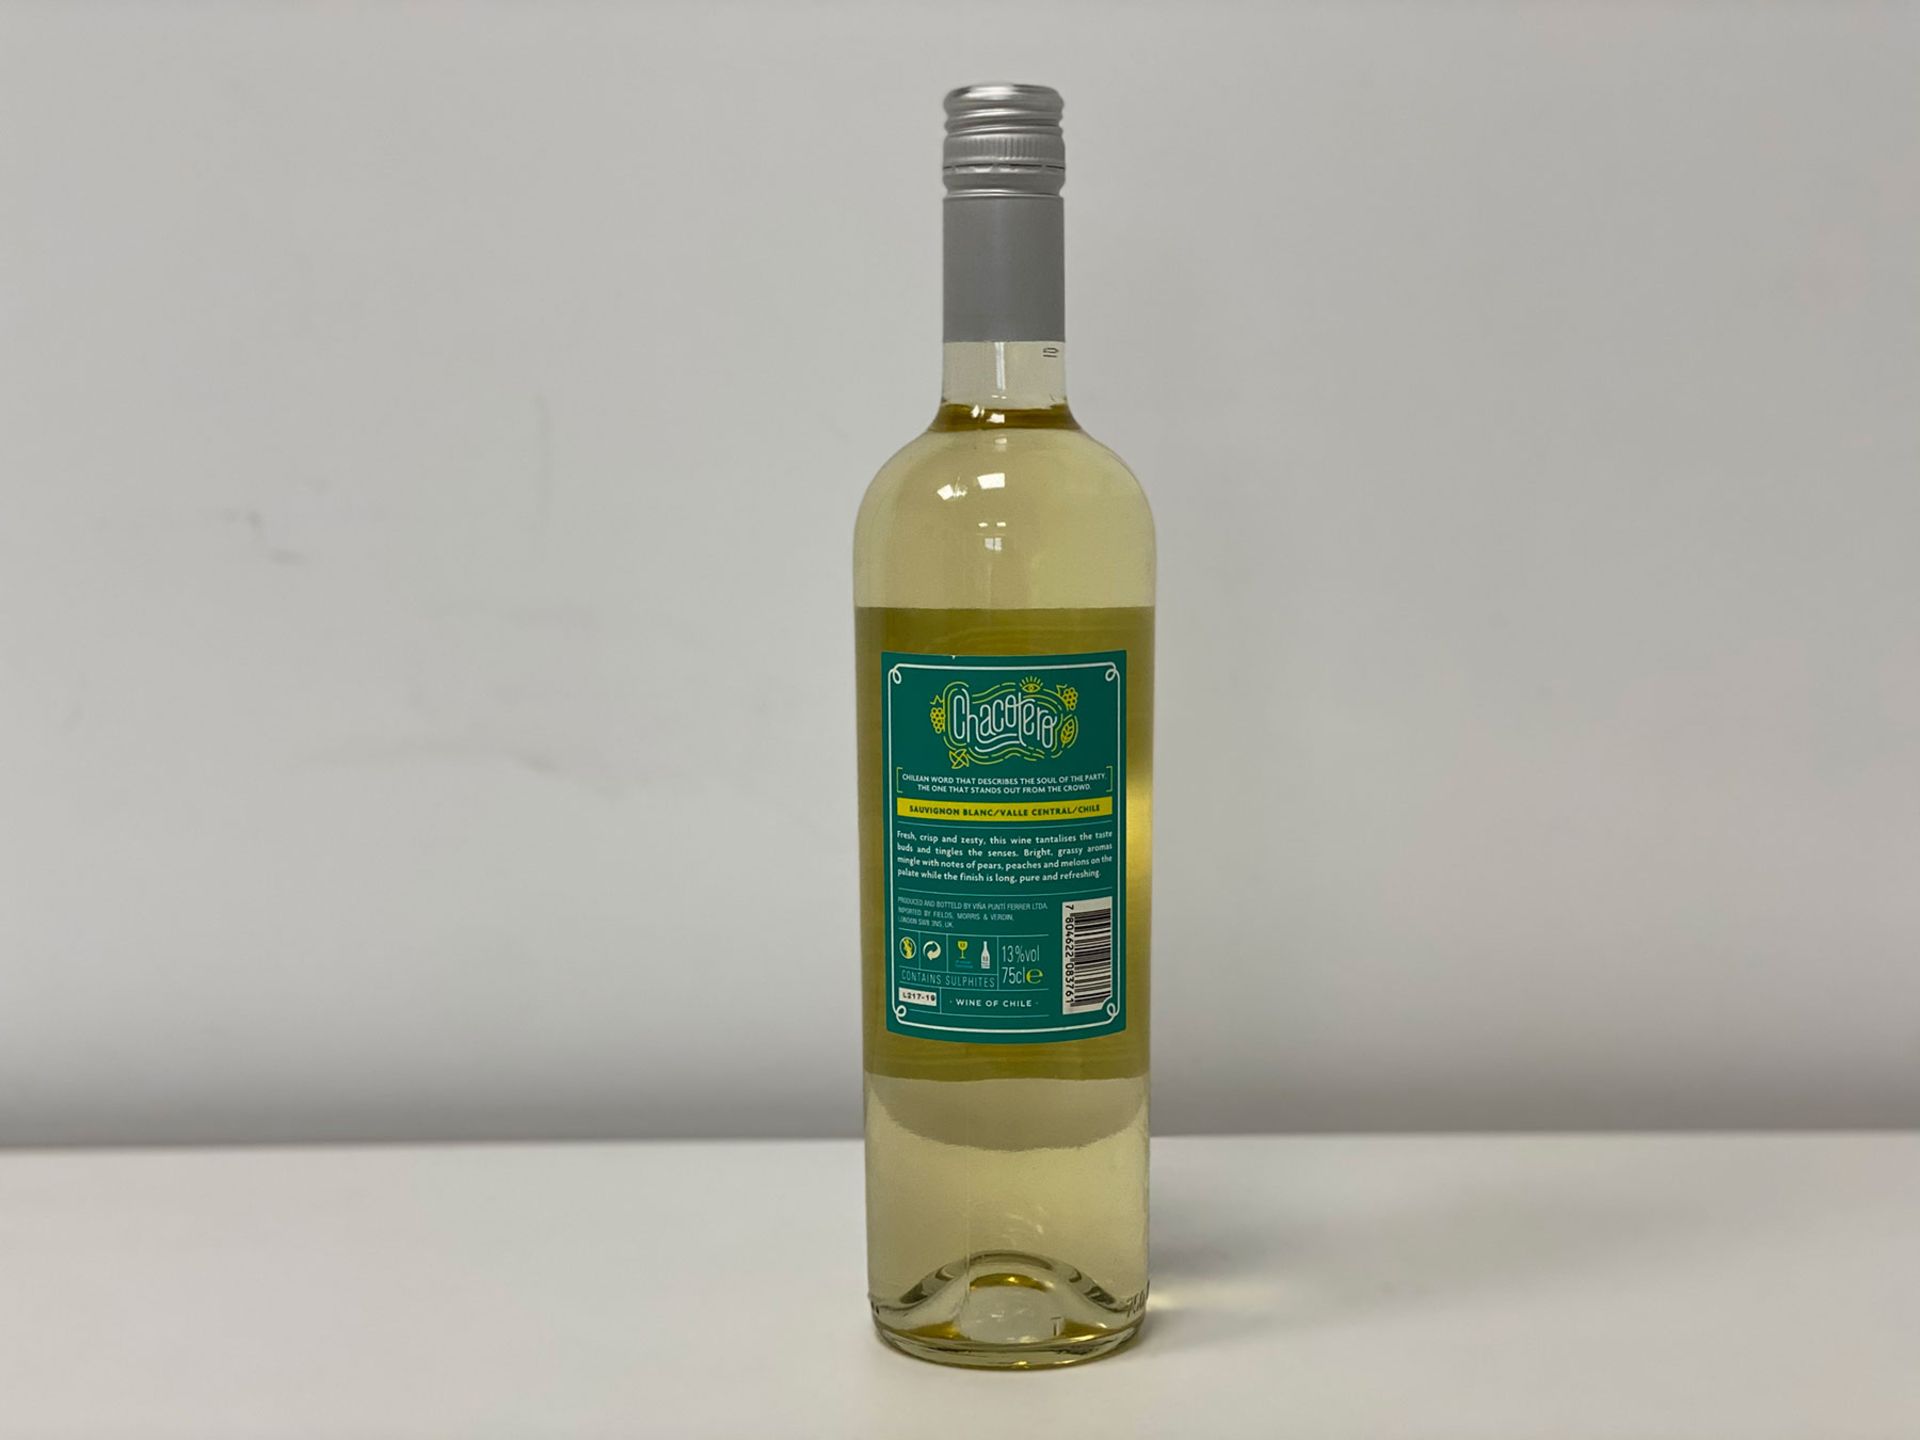 60 Bottles (10 Cases) Punti Ferrer - Chacotero Sauvignon Blanc - Central Valley - Image 2 of 2